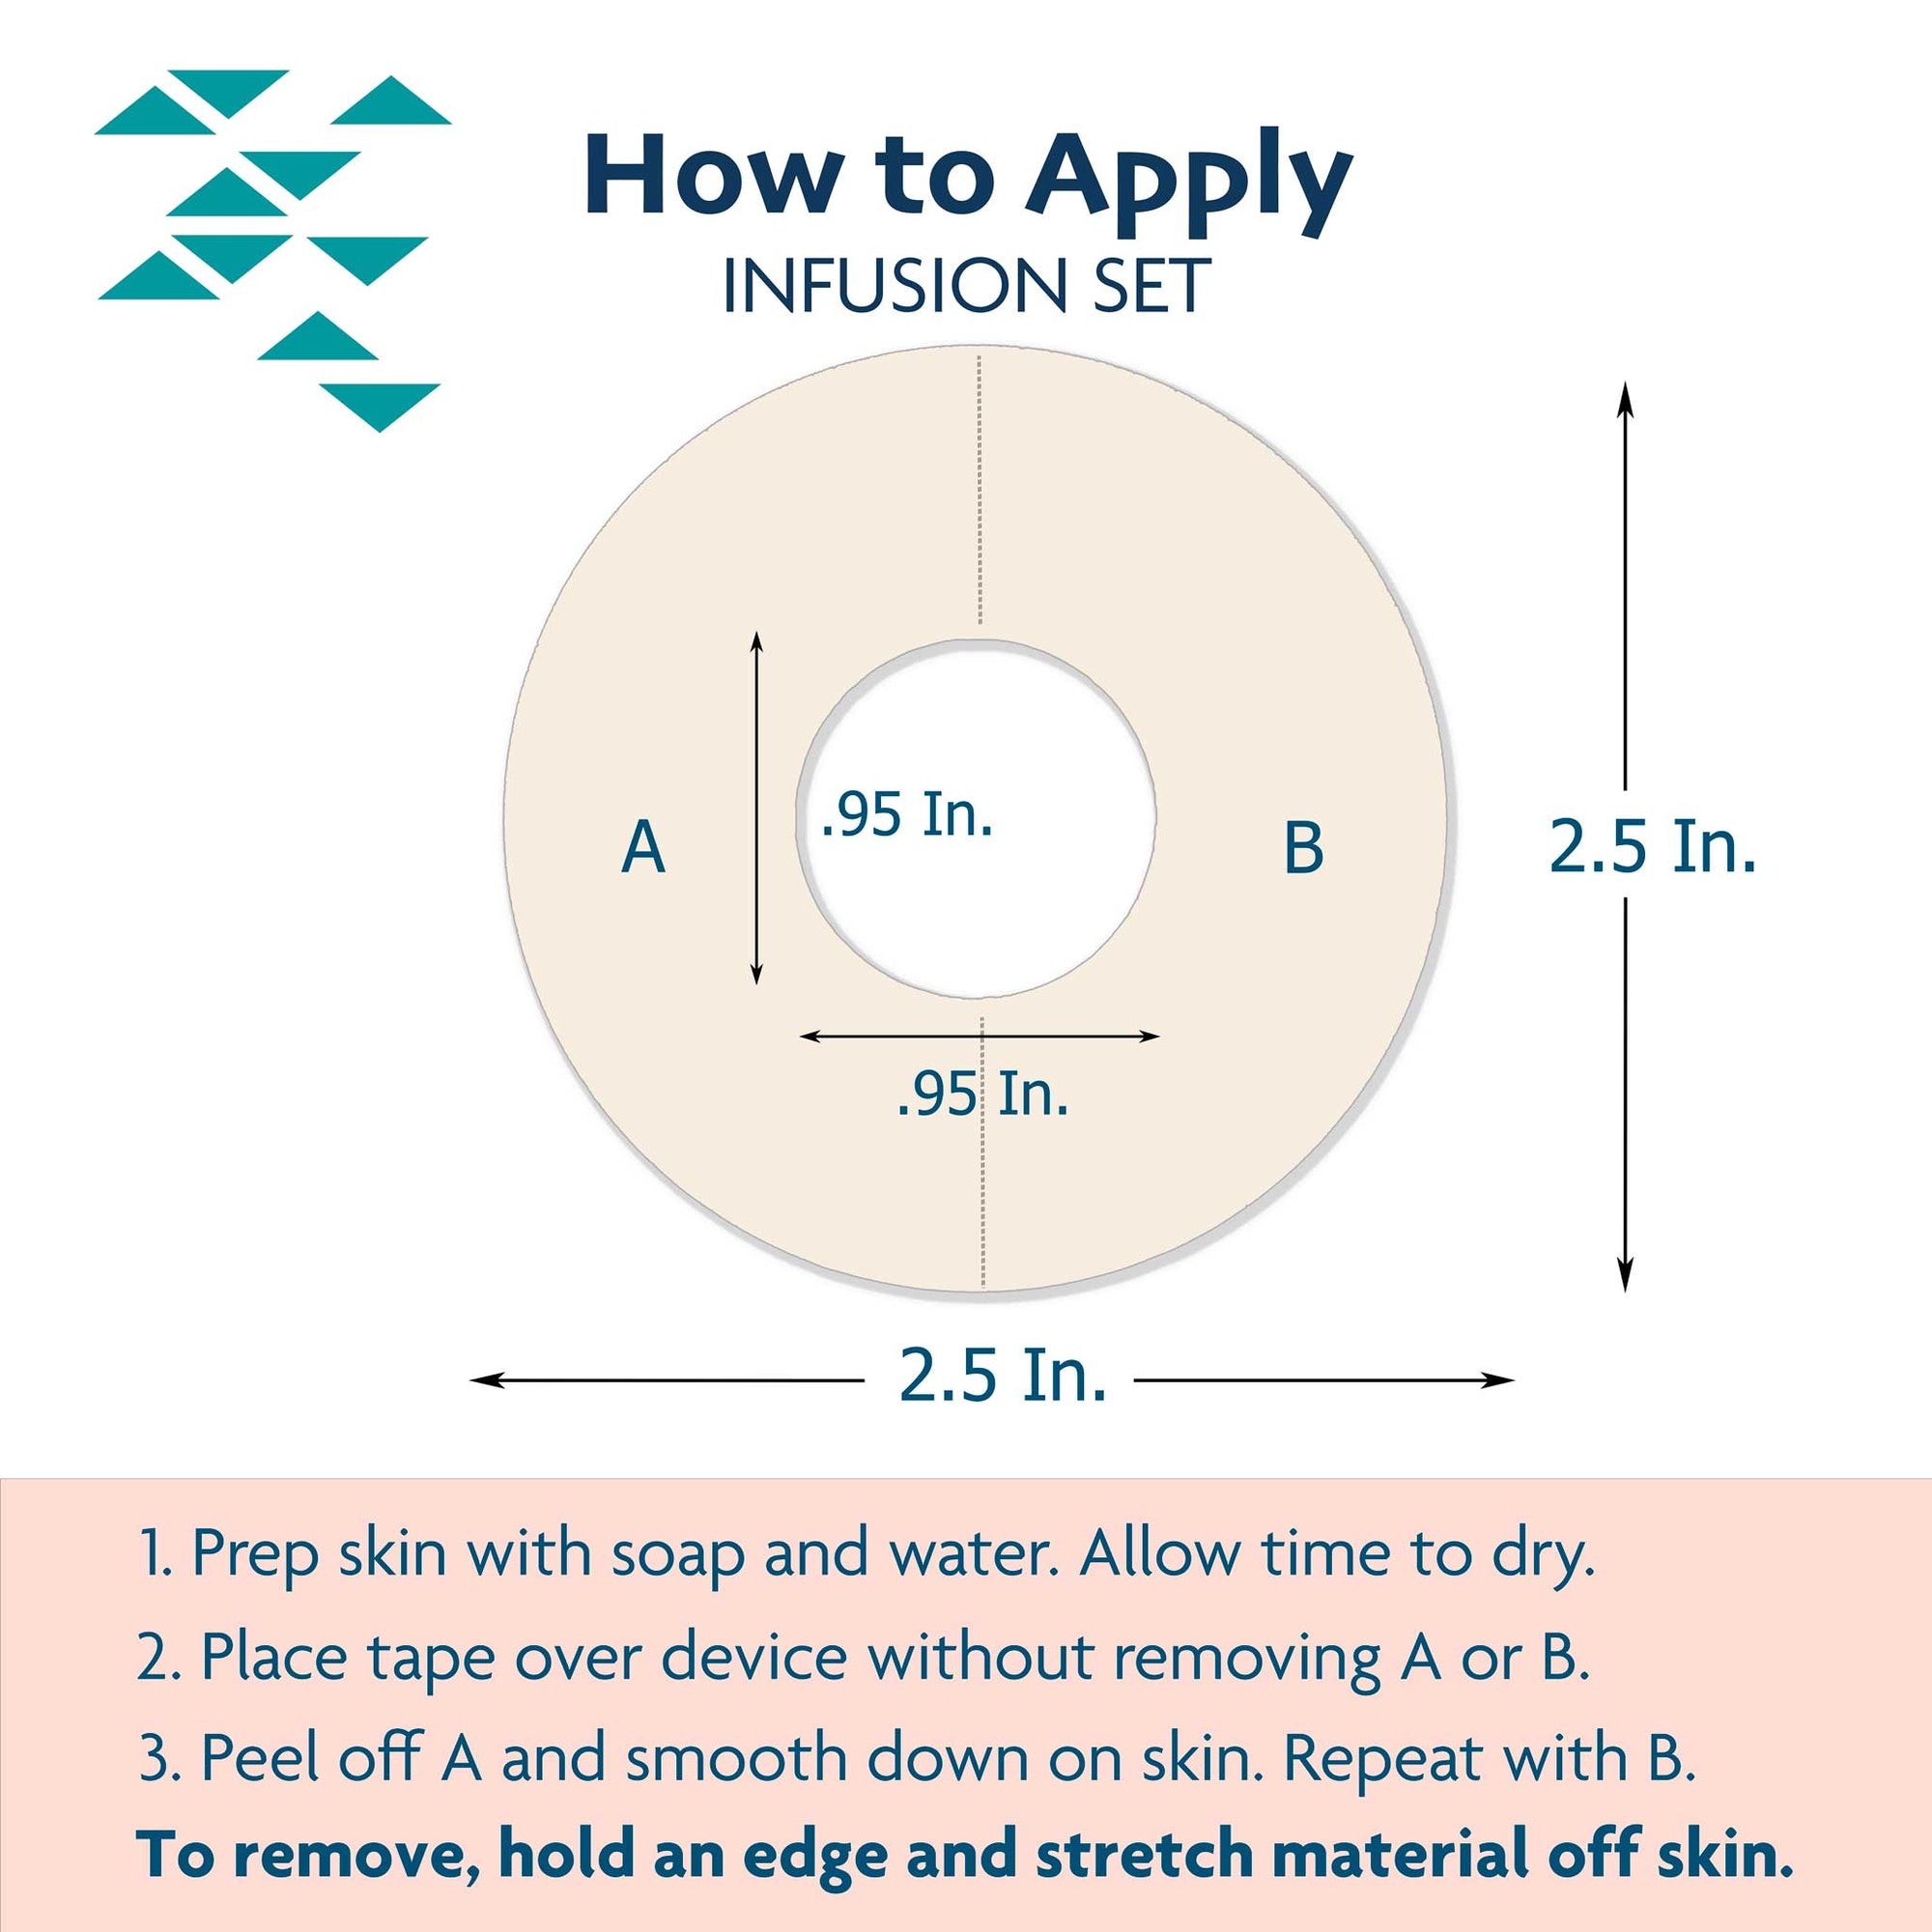 Guide to properly apply infusion set with step by step instructions